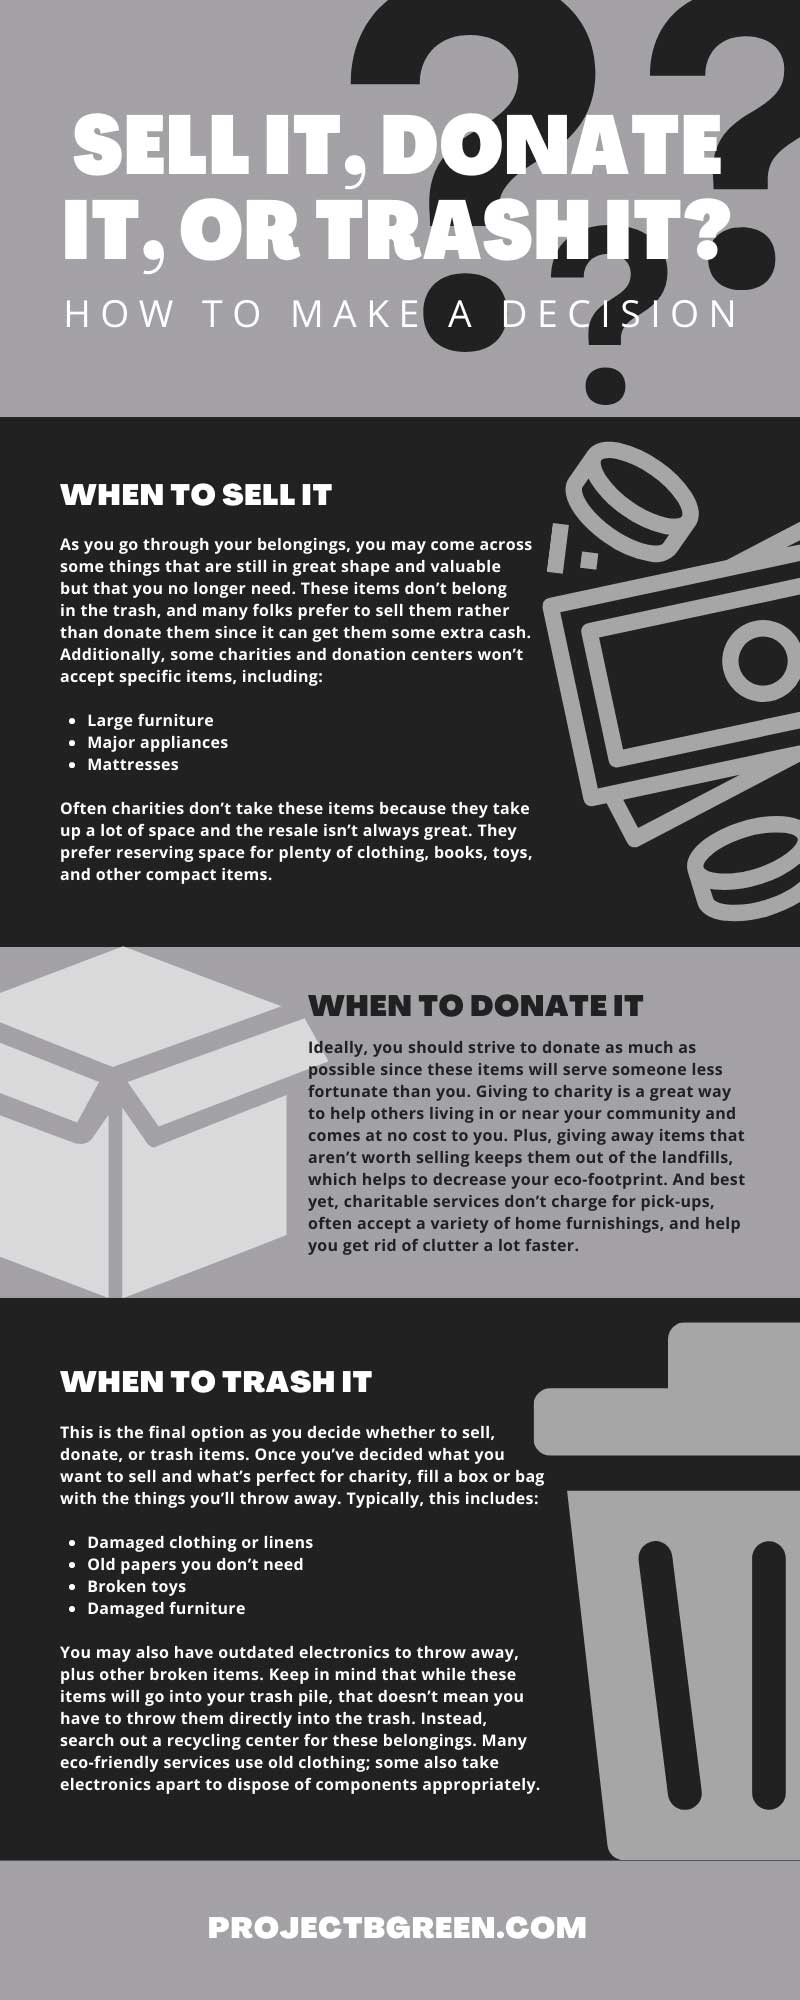 Sell It, Donate It, or Trash It? How To Make a Decision